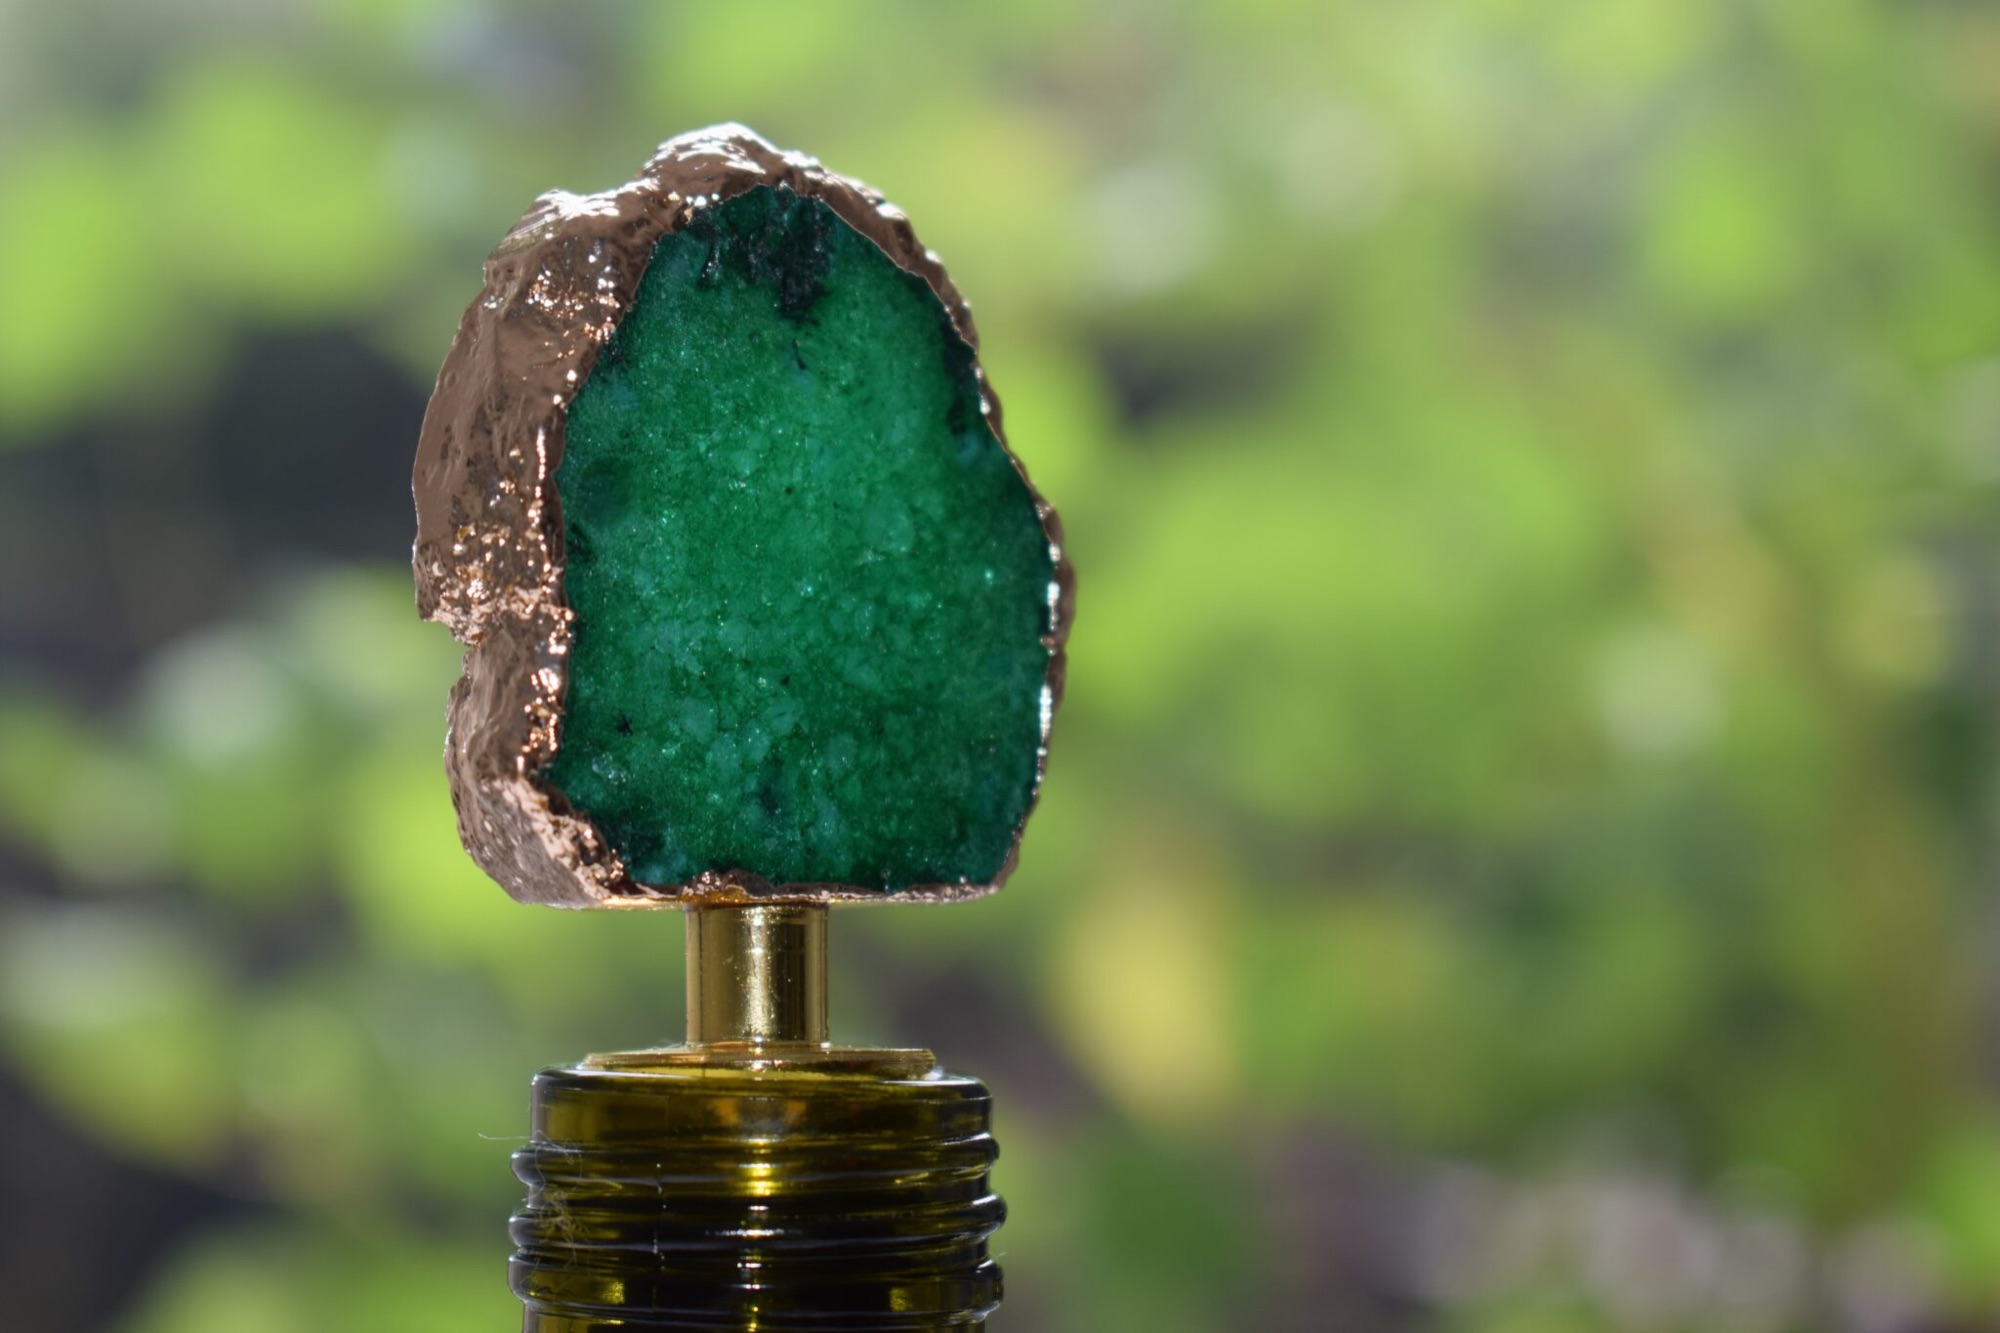 Gold Tone Green Agate Crystal Wine Bottle Stopper by Xander Kostroma